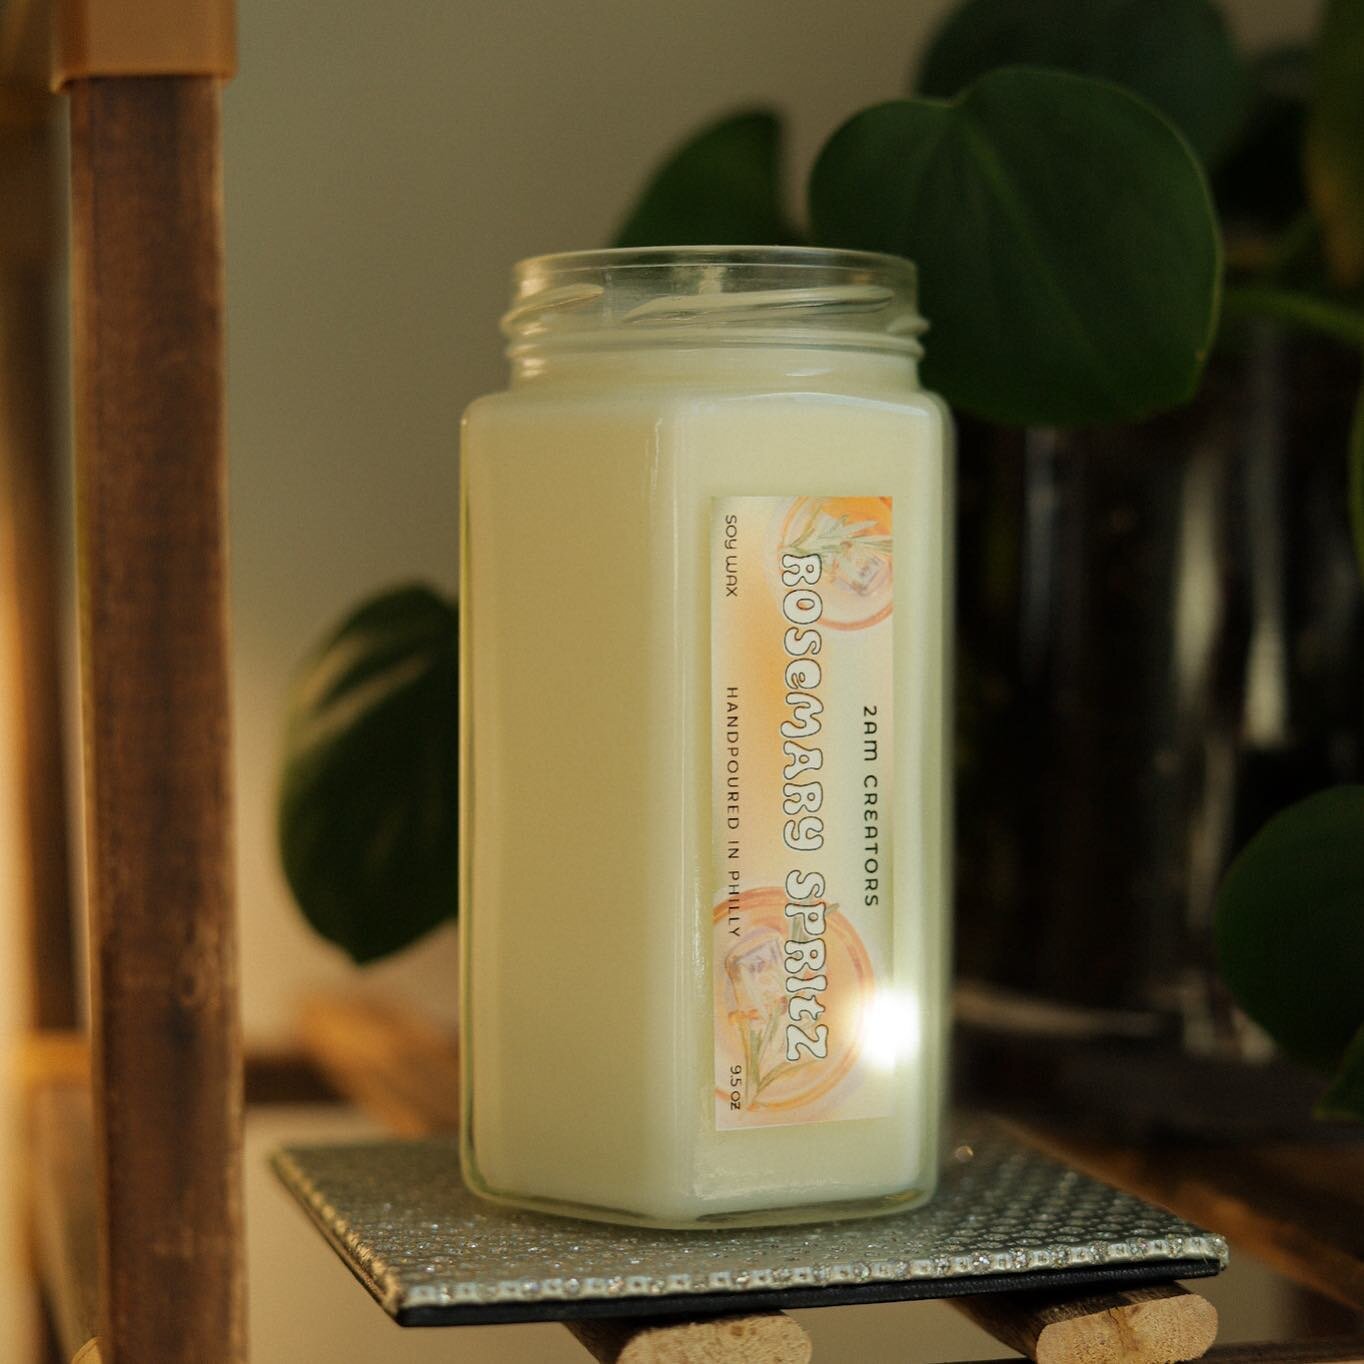 Refresh your space with the invigorating scent of rosemary spritz - the perfect candle for your spring cleaning routine! 🧼🕯️ 

#rosemary #rosemaryscented #springdecorating #soywaxcandles #springcleaning #springtime #springdecor #aromaticherbs #arom